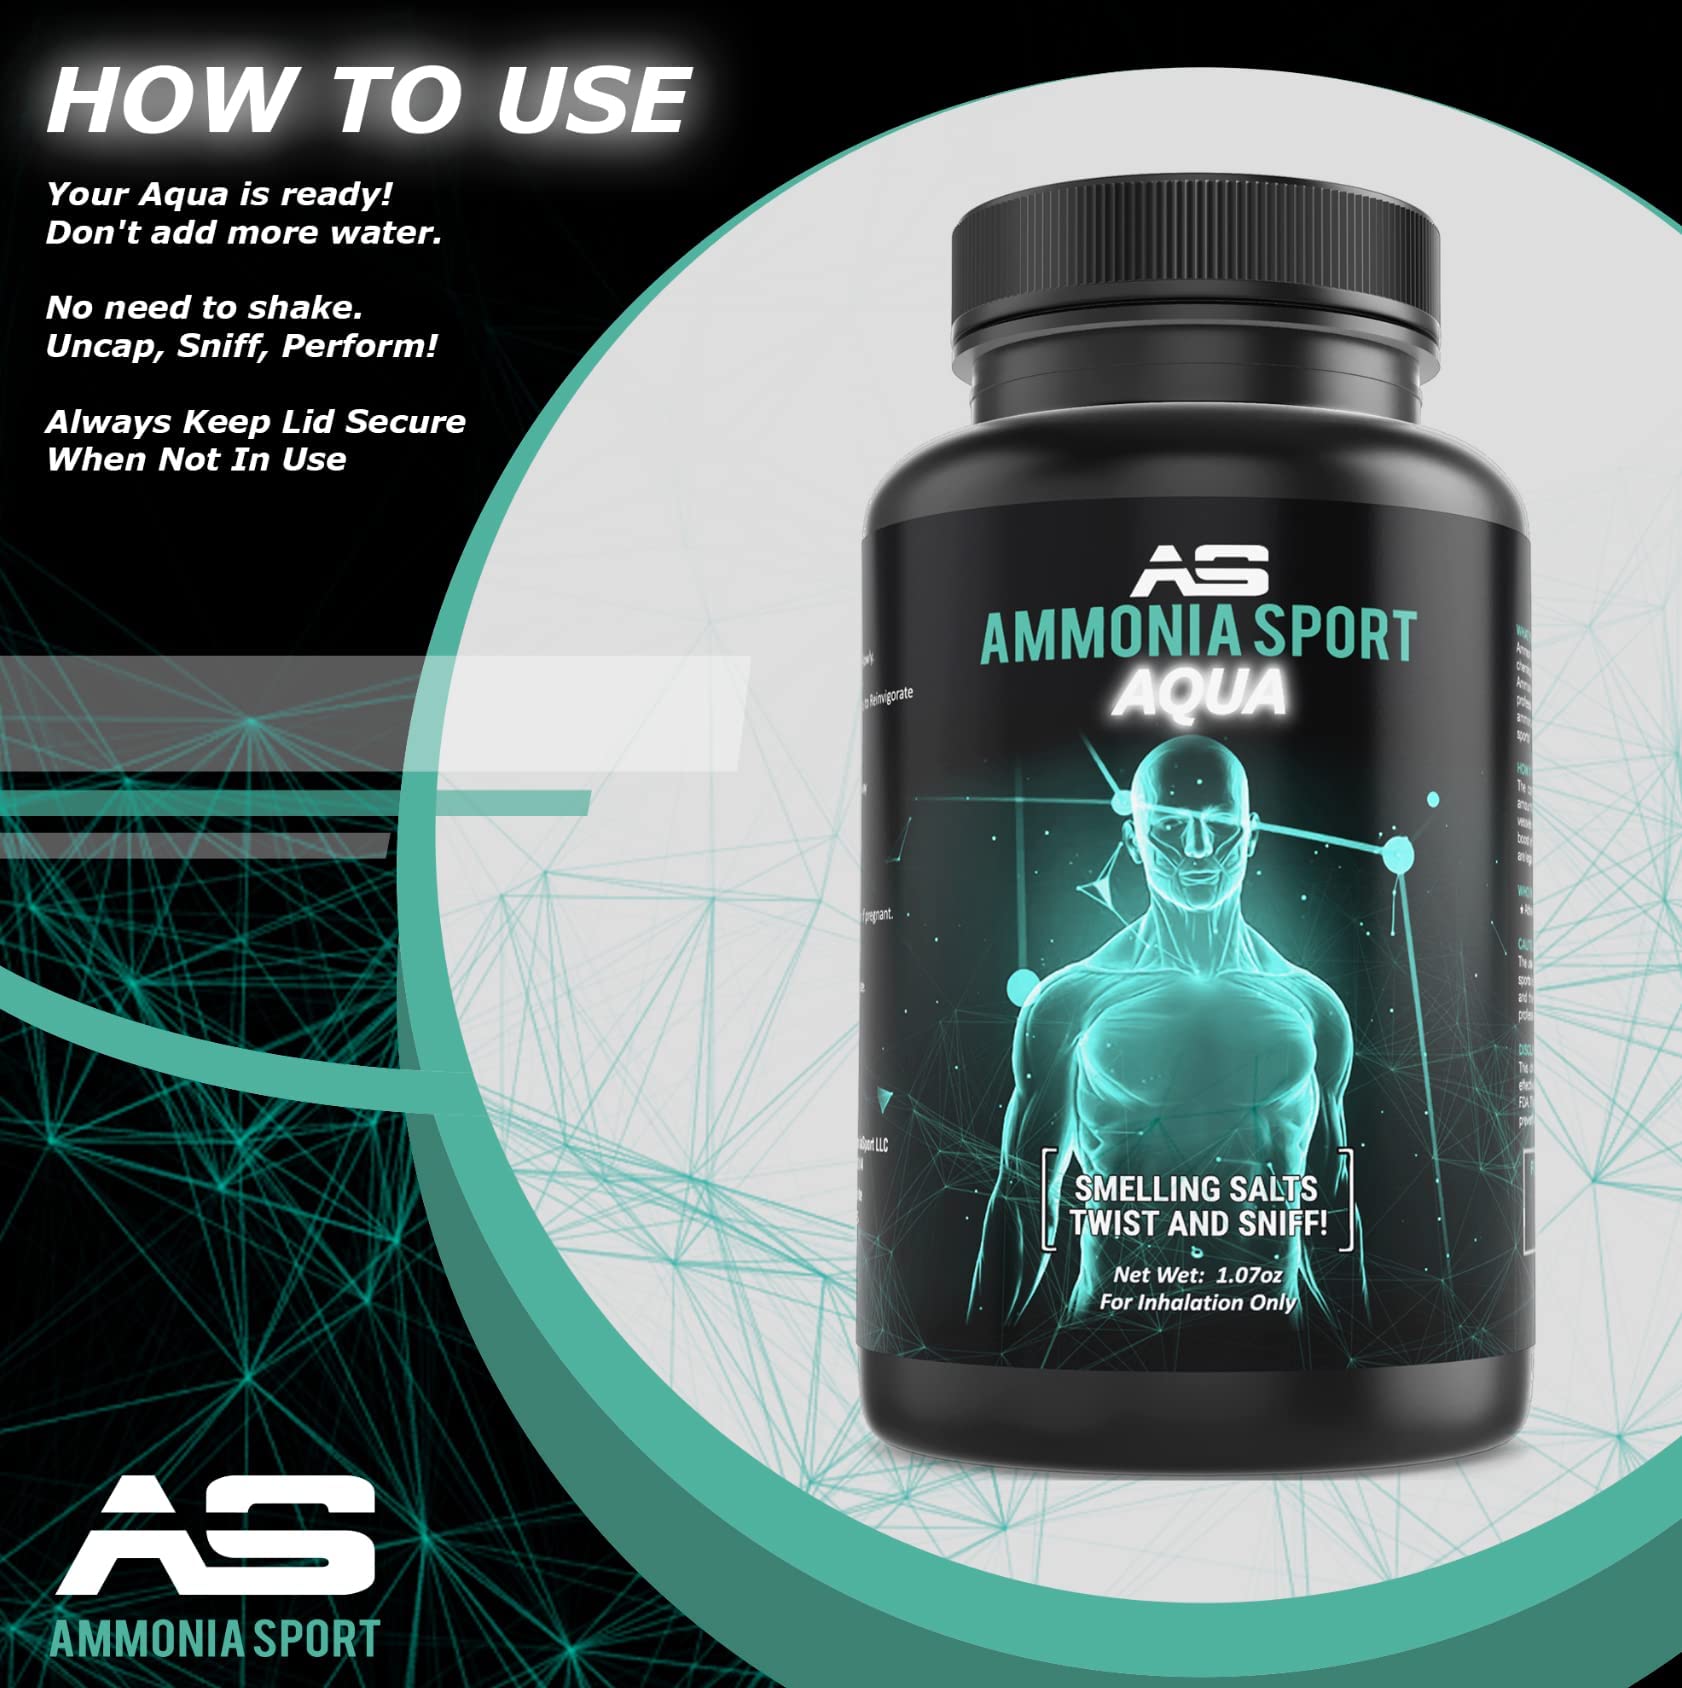 Smelling Salts For Athletes - Aqua - Twist & Sniff! Pre-Activated Salt with Hundreds of Uses Per Bottle - Powerlifting Ammonia Inhalant - Rush, Alert Supplement - Inhalants For Fainting - AmmoniaSport